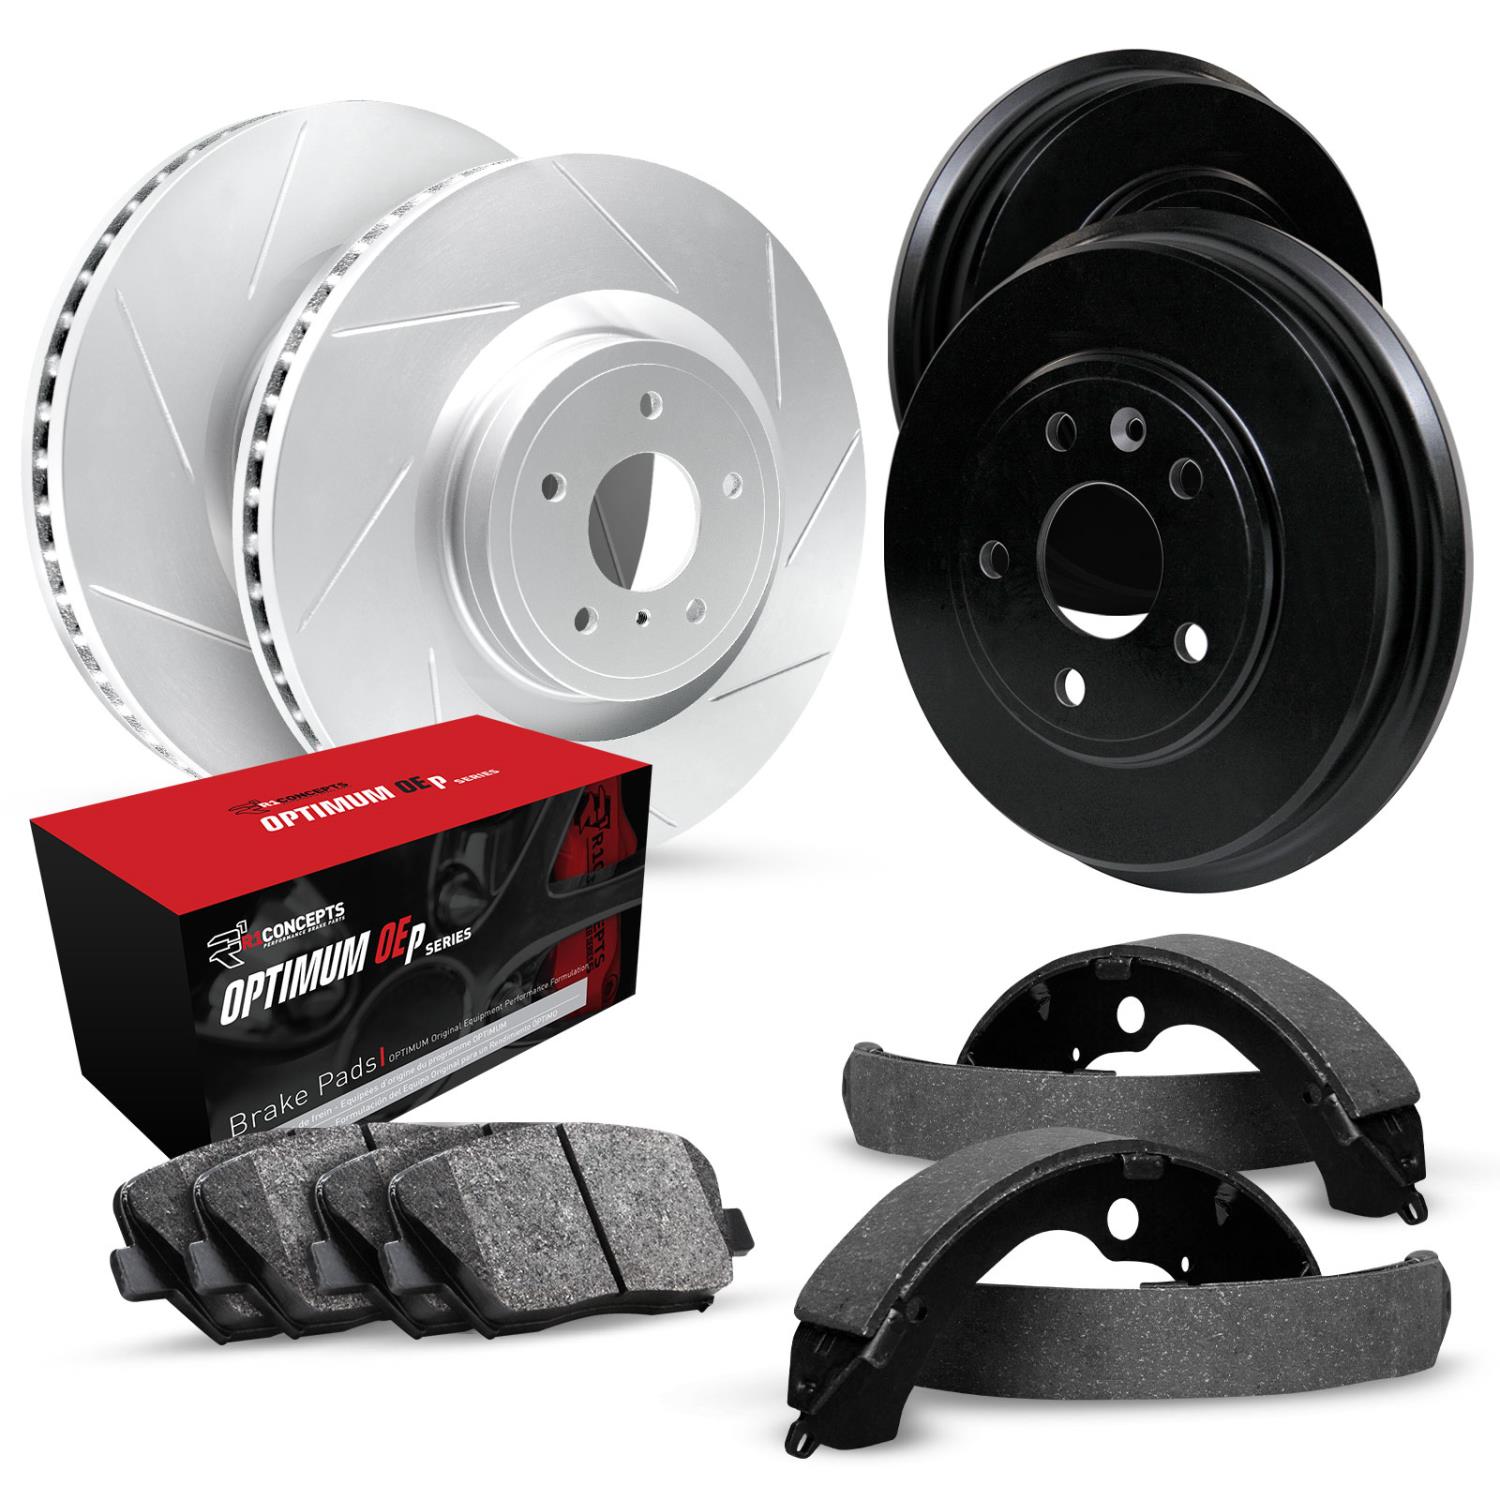 GEO-Carbon Slotted Brake Rotor & Drum Set w/Optimum OE Pads & Shoes, 2001-2005 GM, Position: Front & Rear